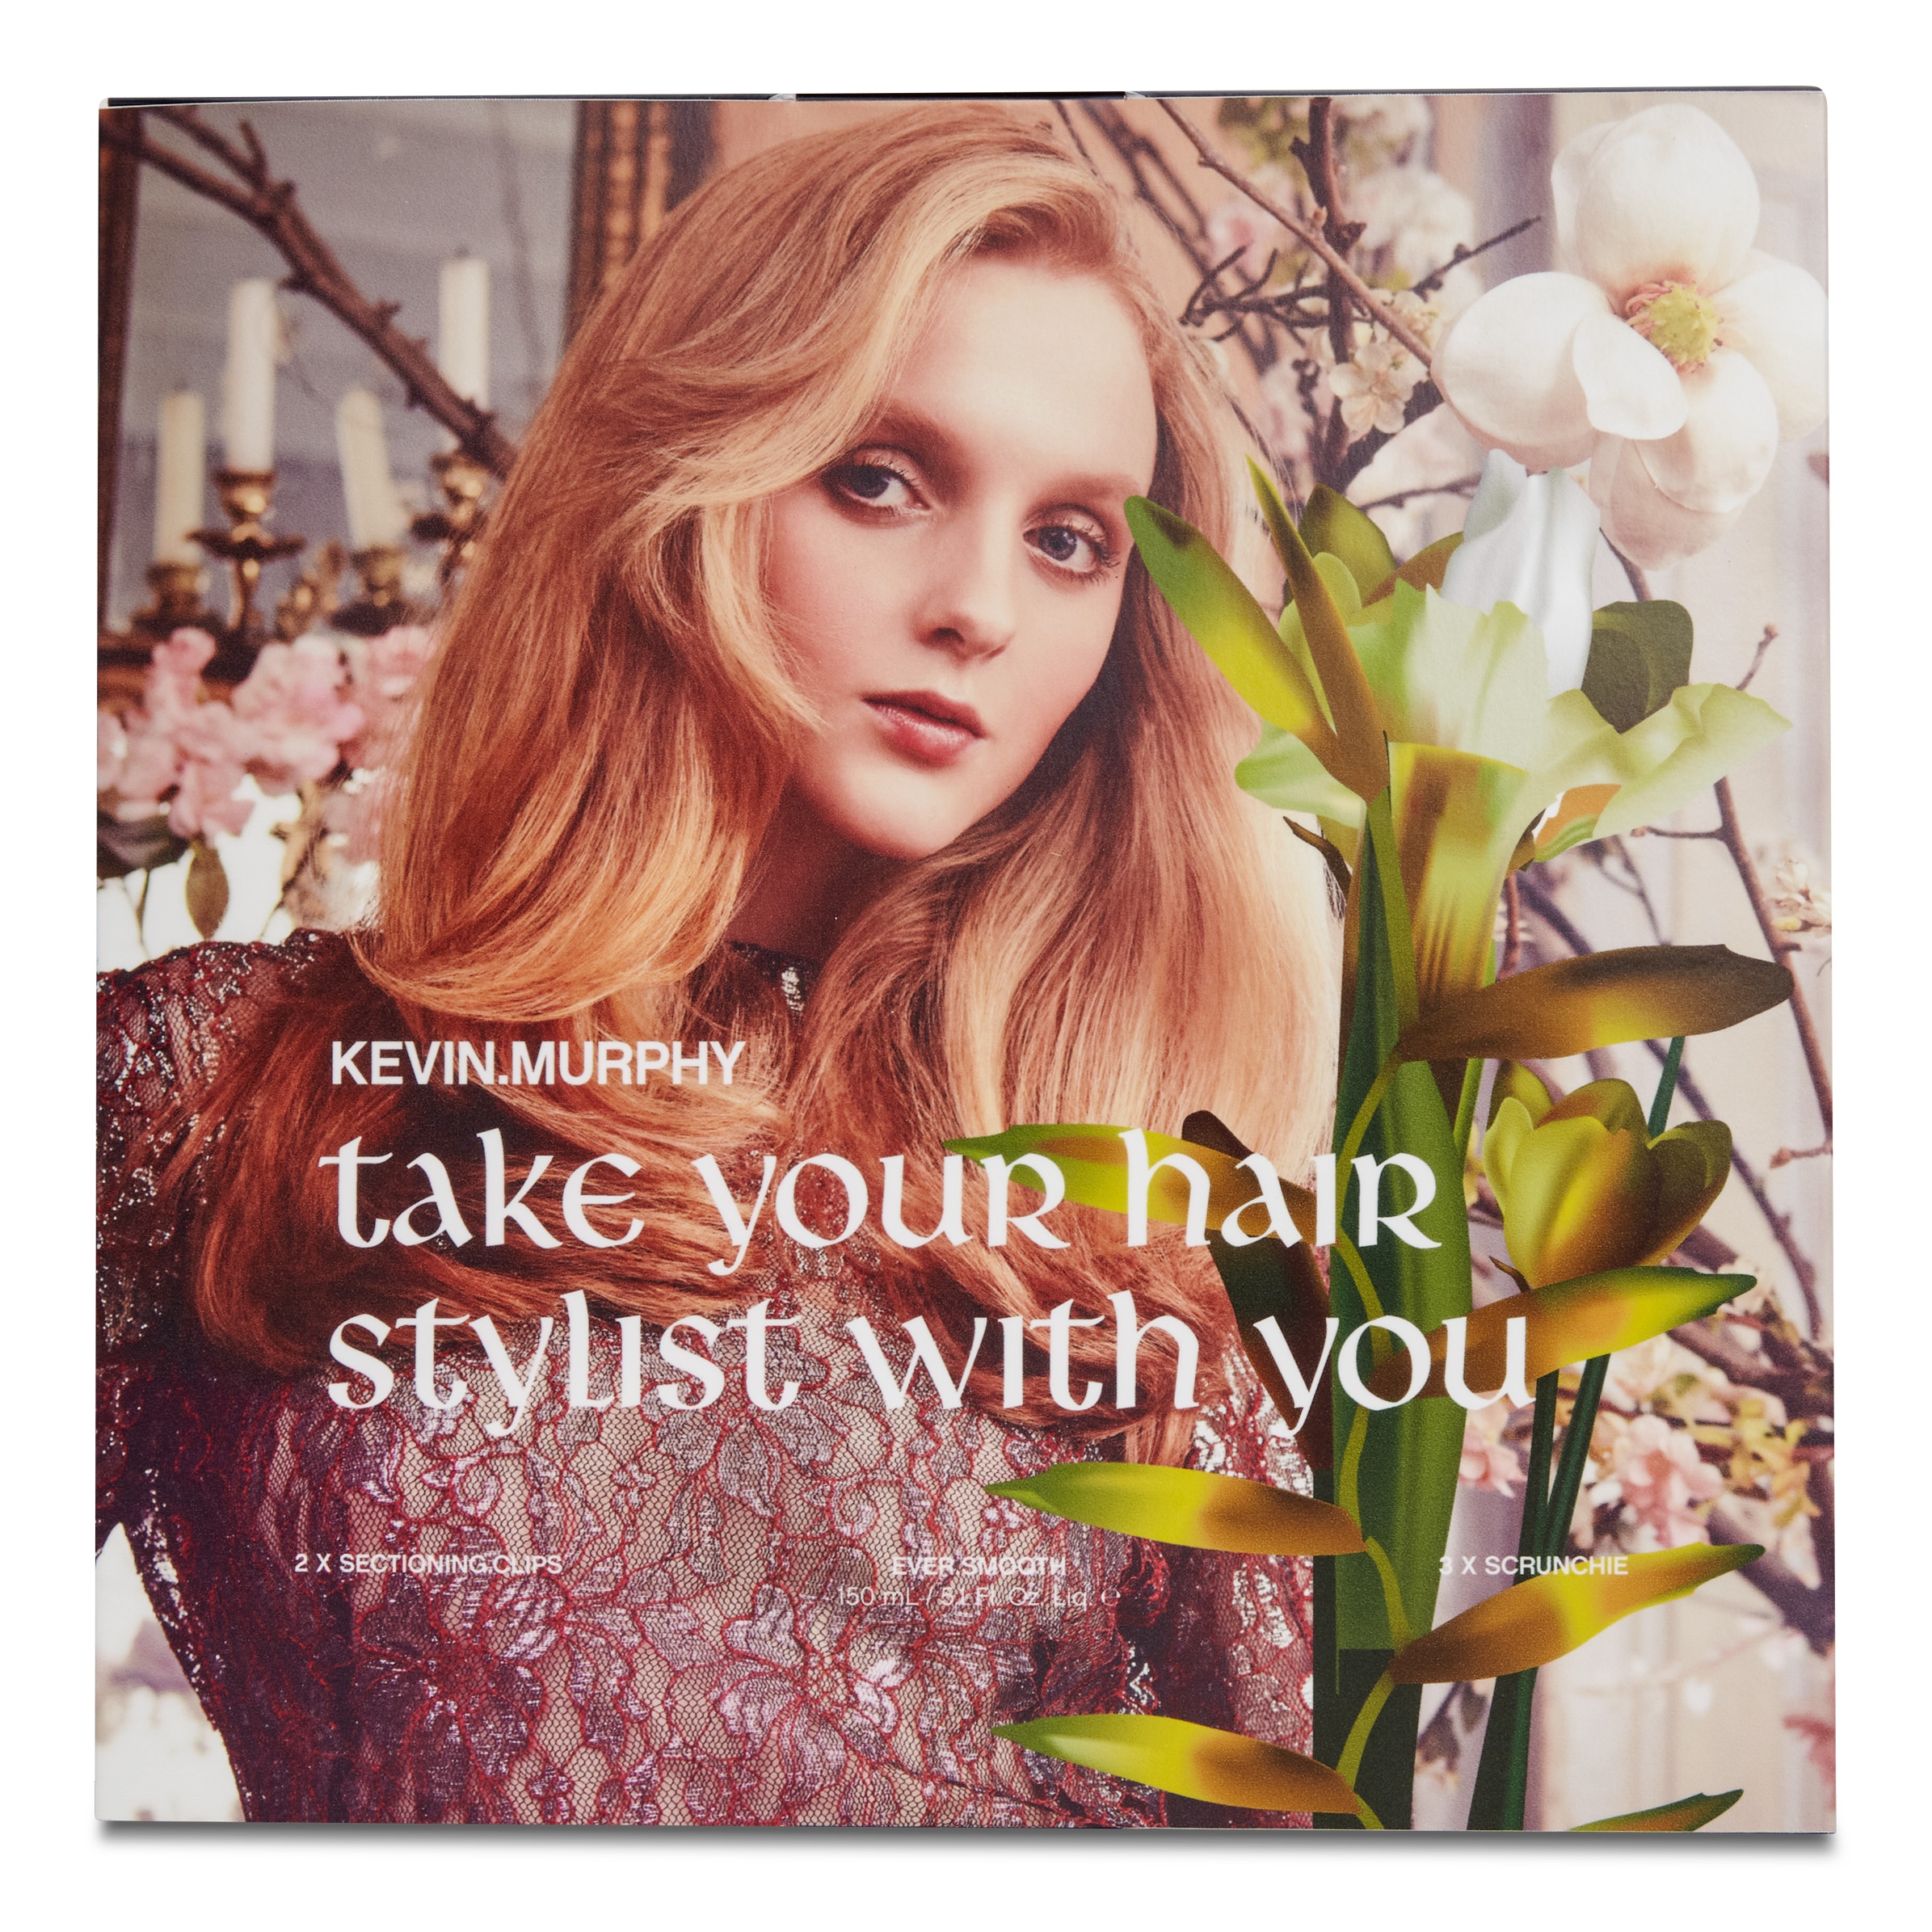 KEVIN.MURPHY Prepack: Take Your Hair Stylist With You 3pk Box Set